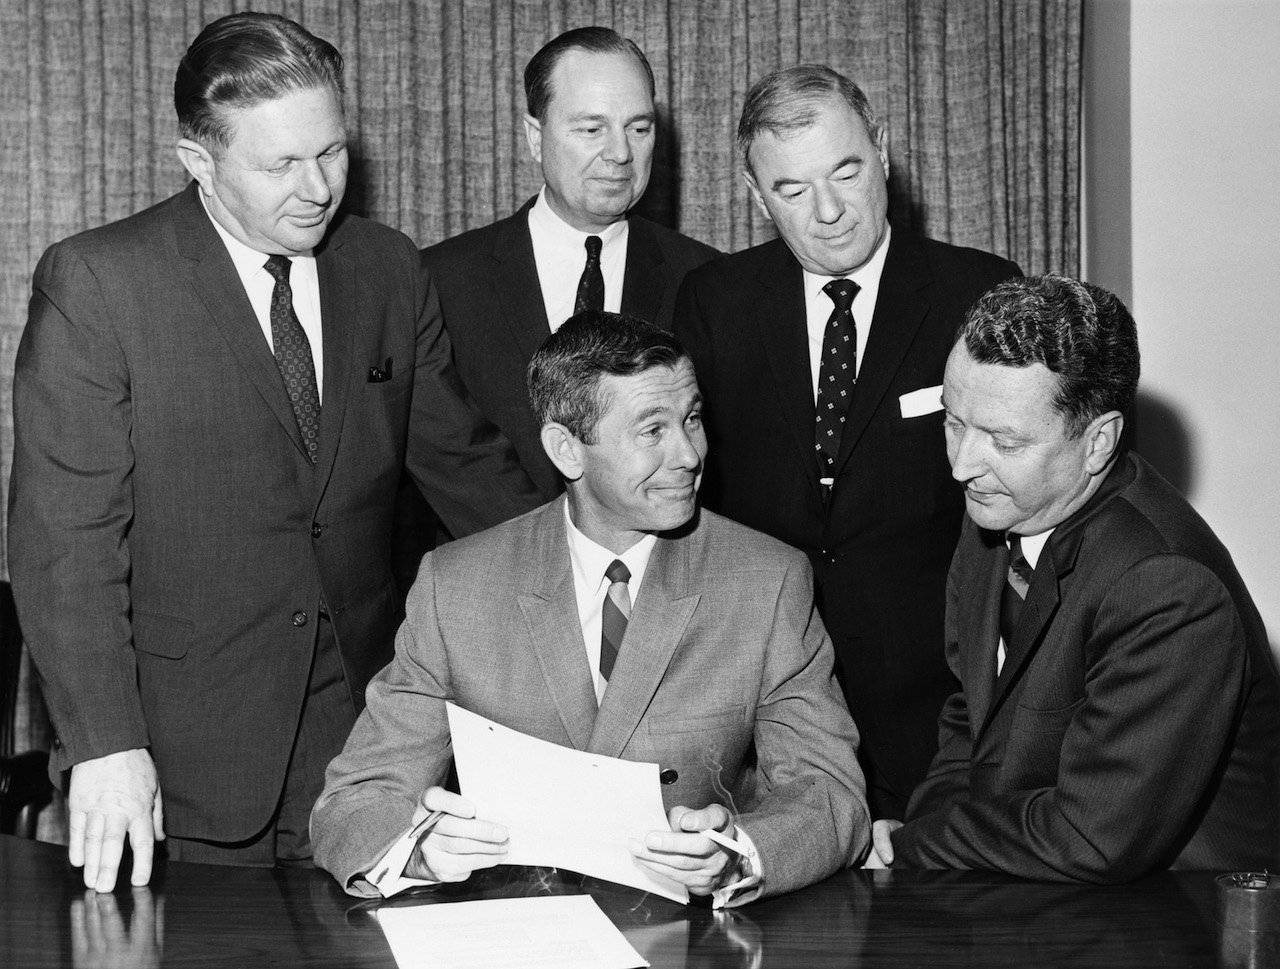 (l-r) NBC's senior vice president for programming and talent Mort Werner, host Johnny Carson, NBC Chairman Walter D. Scott, president of NBC Television Don Durgin, NBC president Julian Goodman during a signing of Johny Carson's Tonight Show contract in 1966